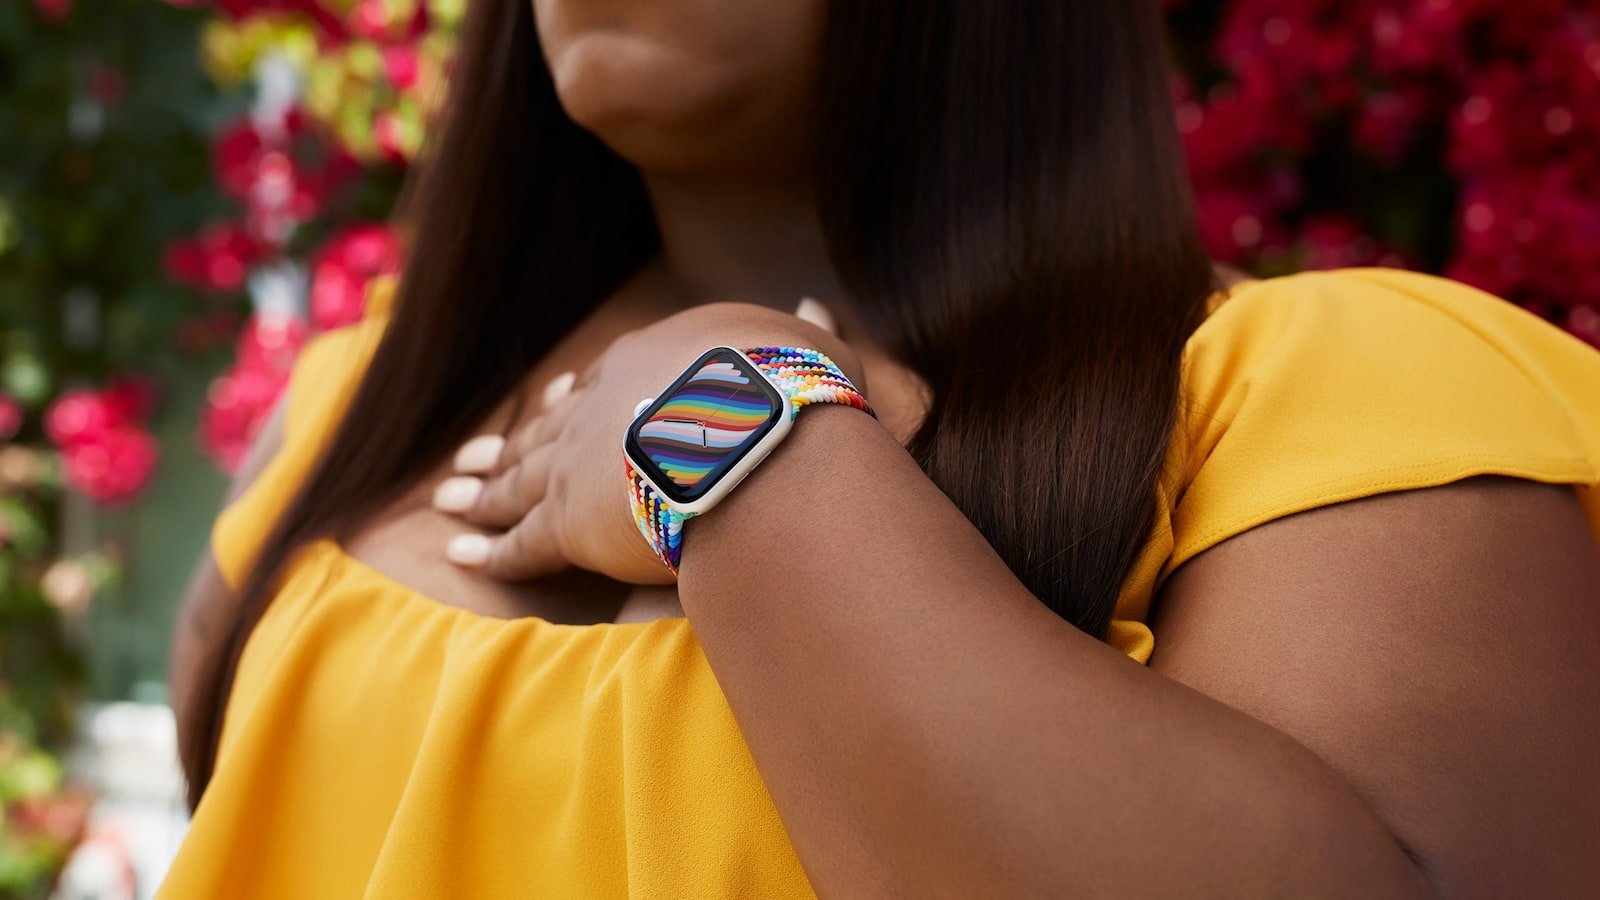 Apple Watch Pride Edition bands are an illustration of support for the LGBTQ+ community